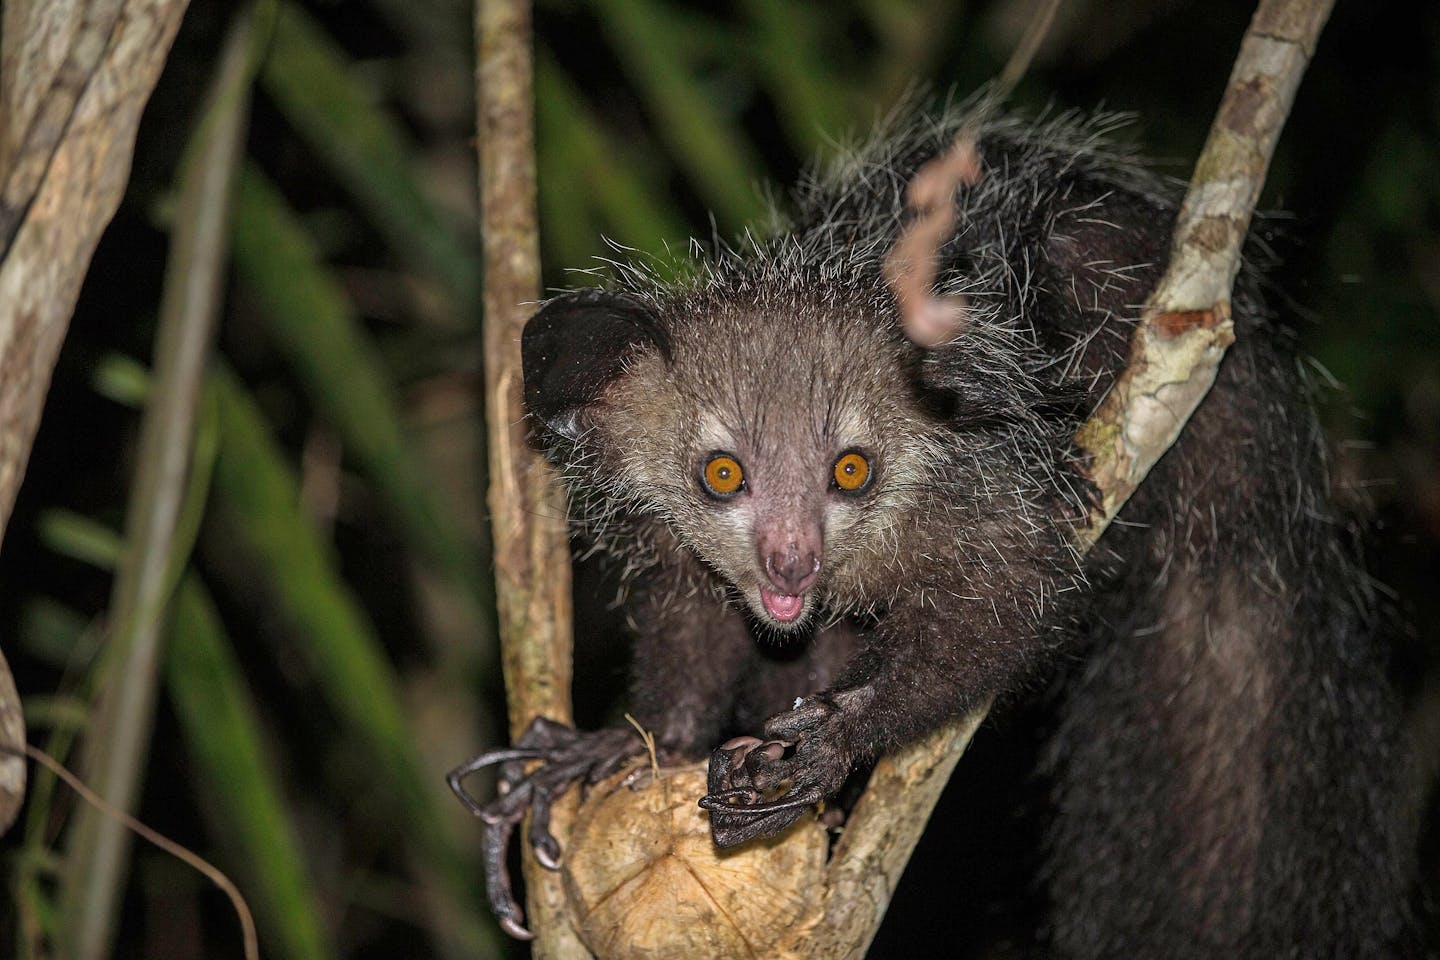 Aye-aye: The enigmatic life of the world's largest nocturnal primate